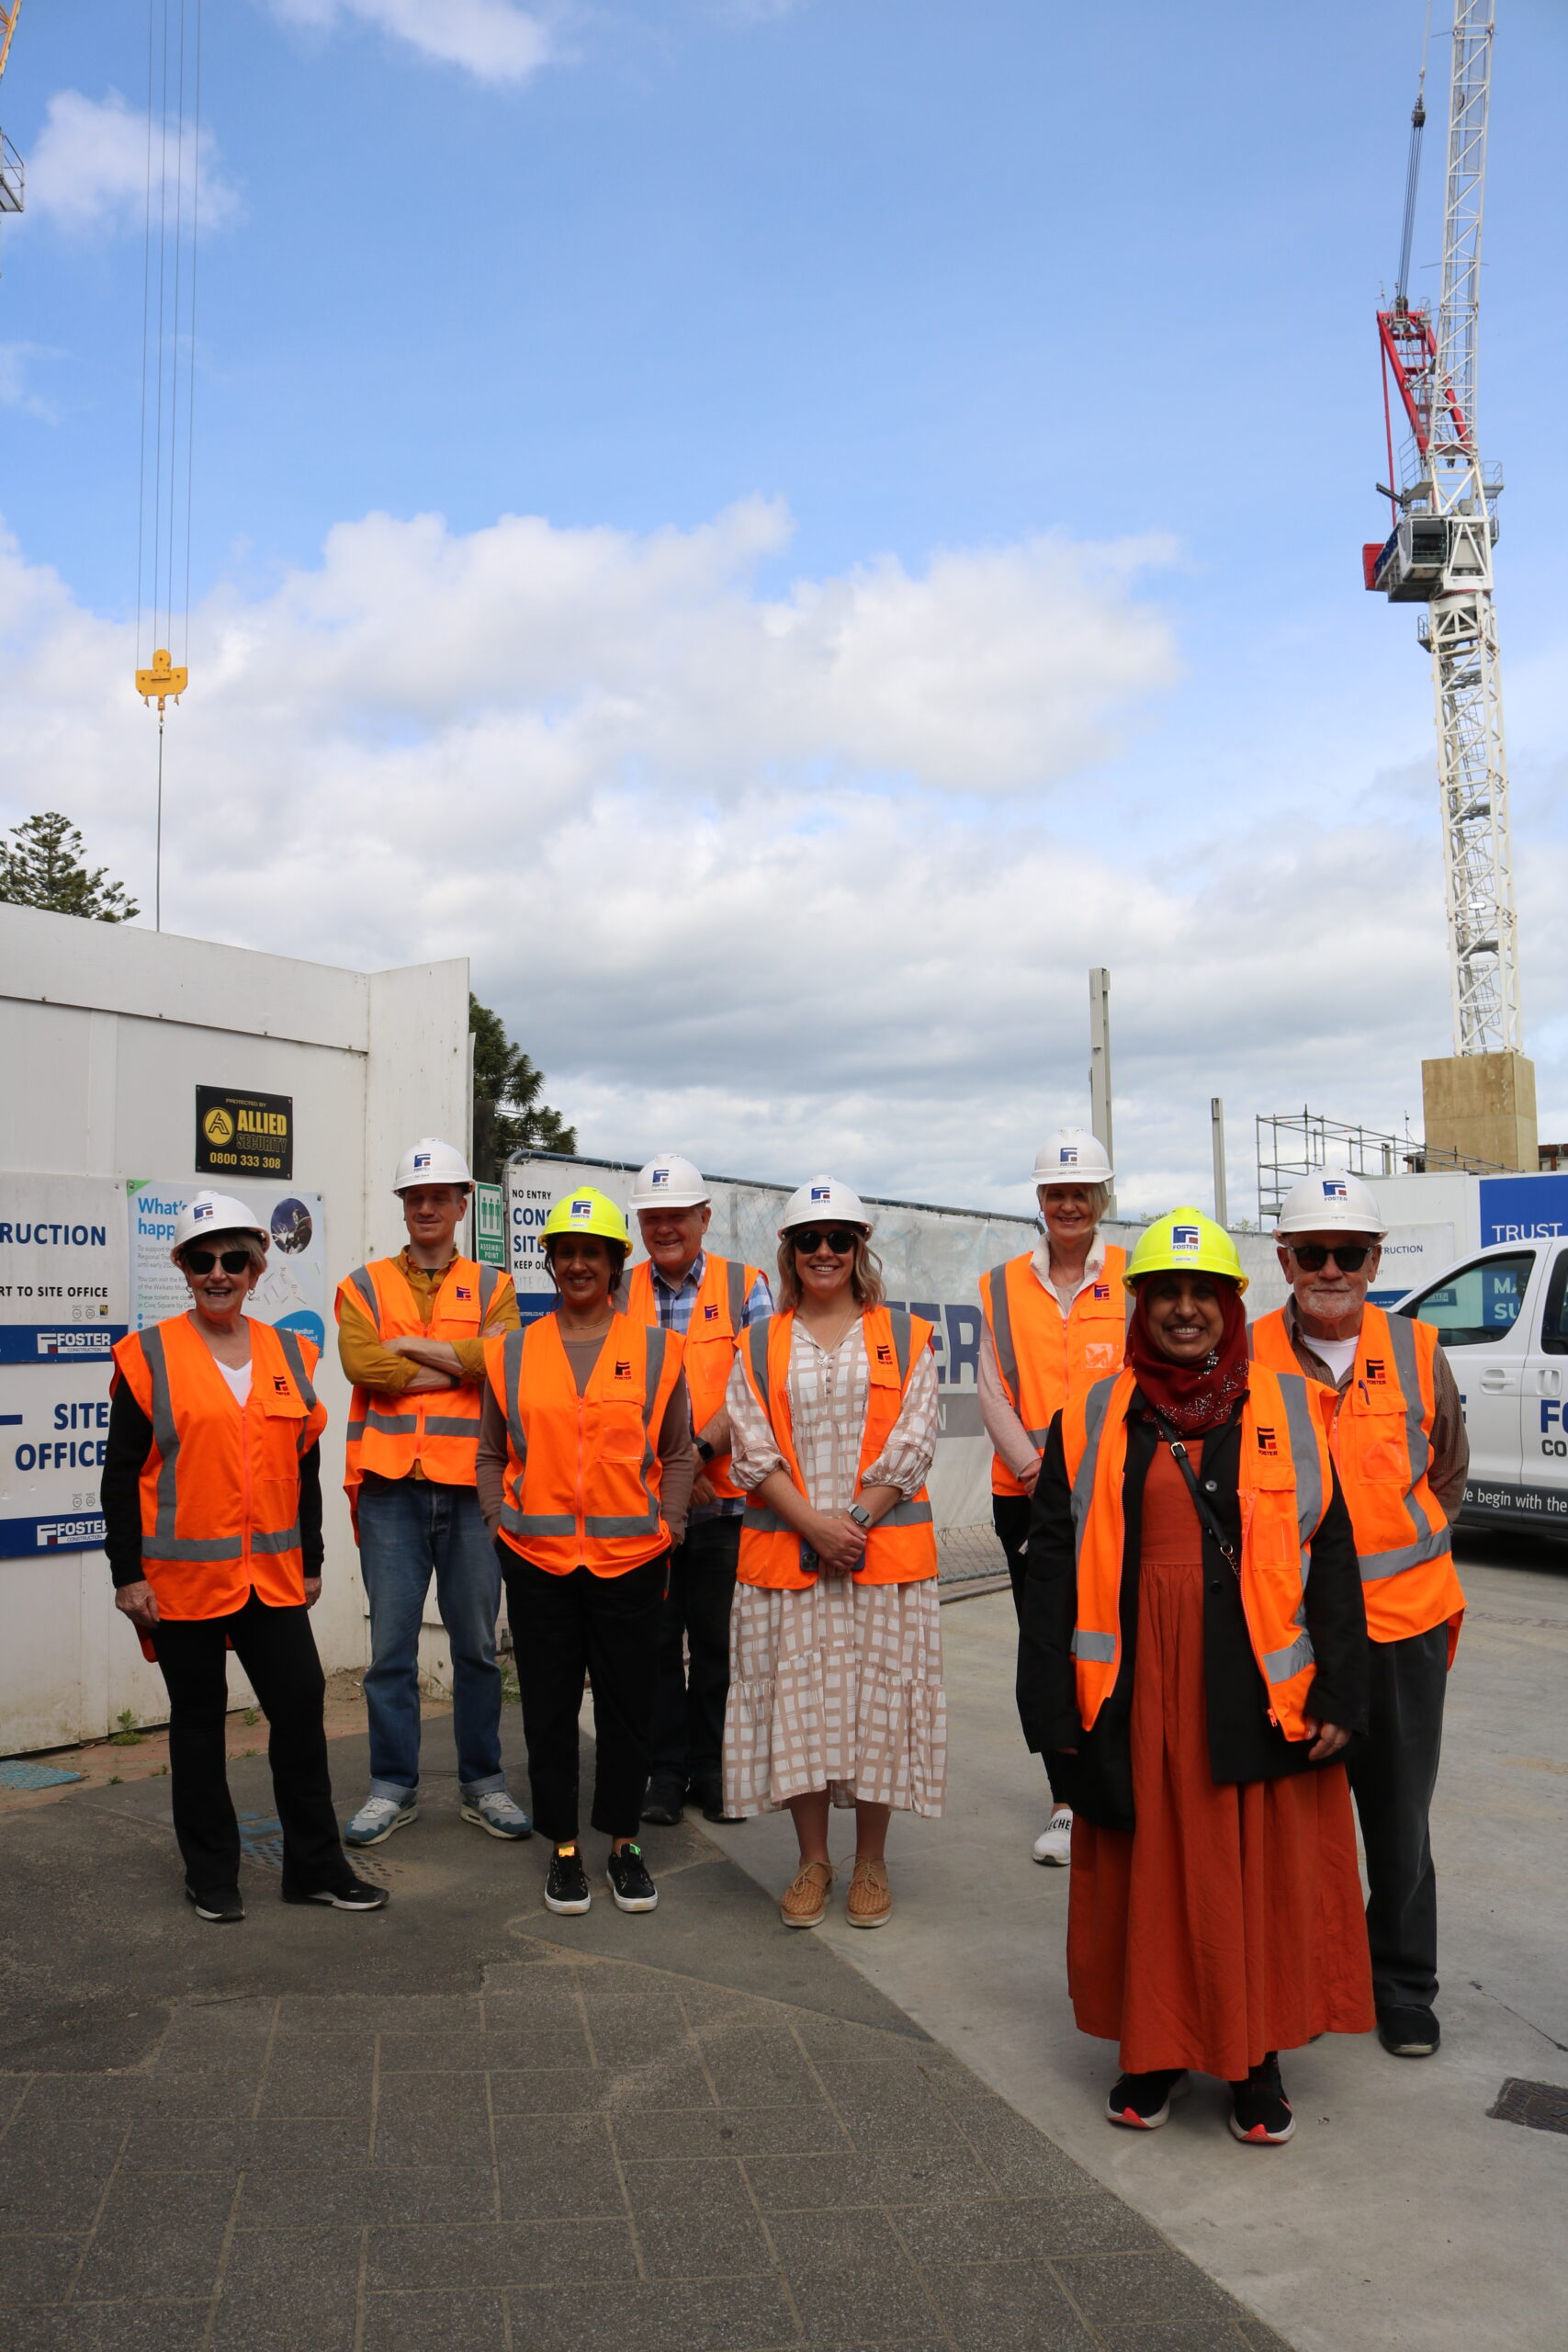 Trustees standing outside the Waikato Regional Theatre construction site wearing hi-vis vests and hard hats, with a crane in the background.